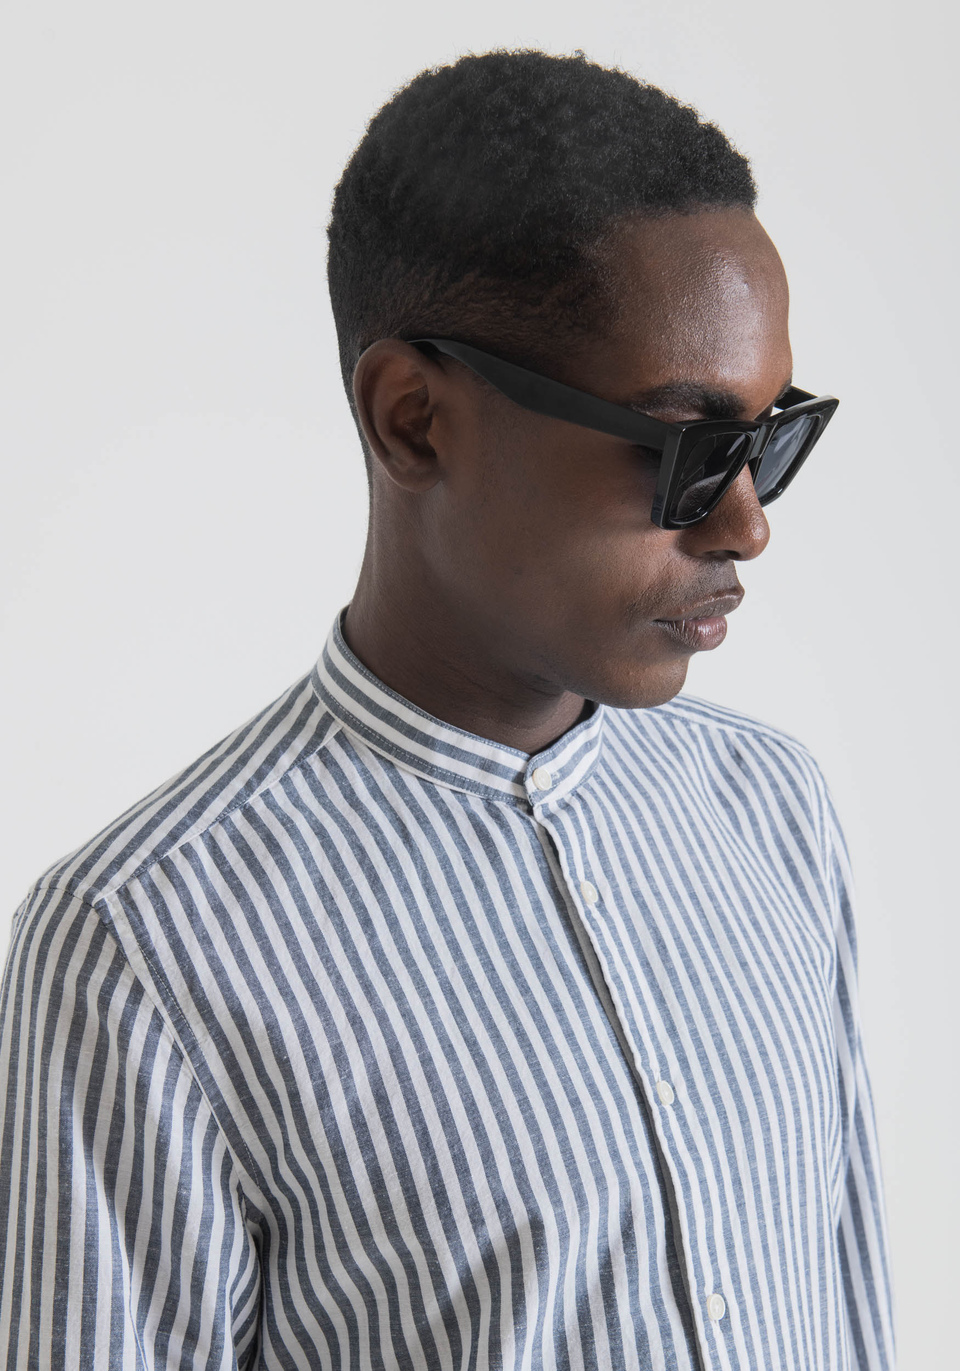 SLIM-FIT SHIRT IN COTTON AND LINEN WITH KOREAN COLLAR AND STRIPED PATTERN - Antony Morato Online Shop